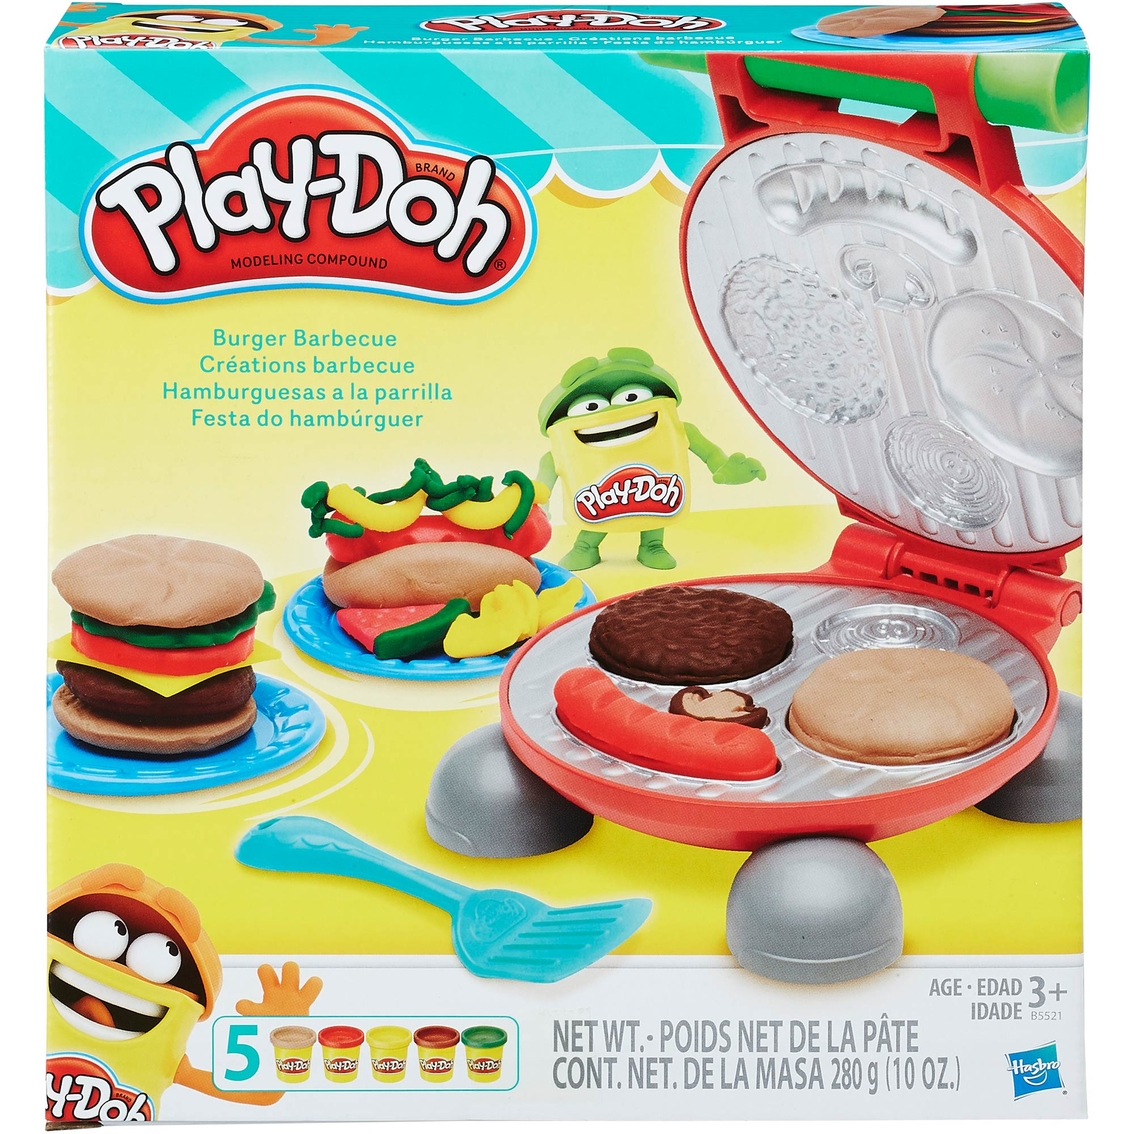 Play-Doh Kitchen Creations Burger Barbecue B5521 for sale online